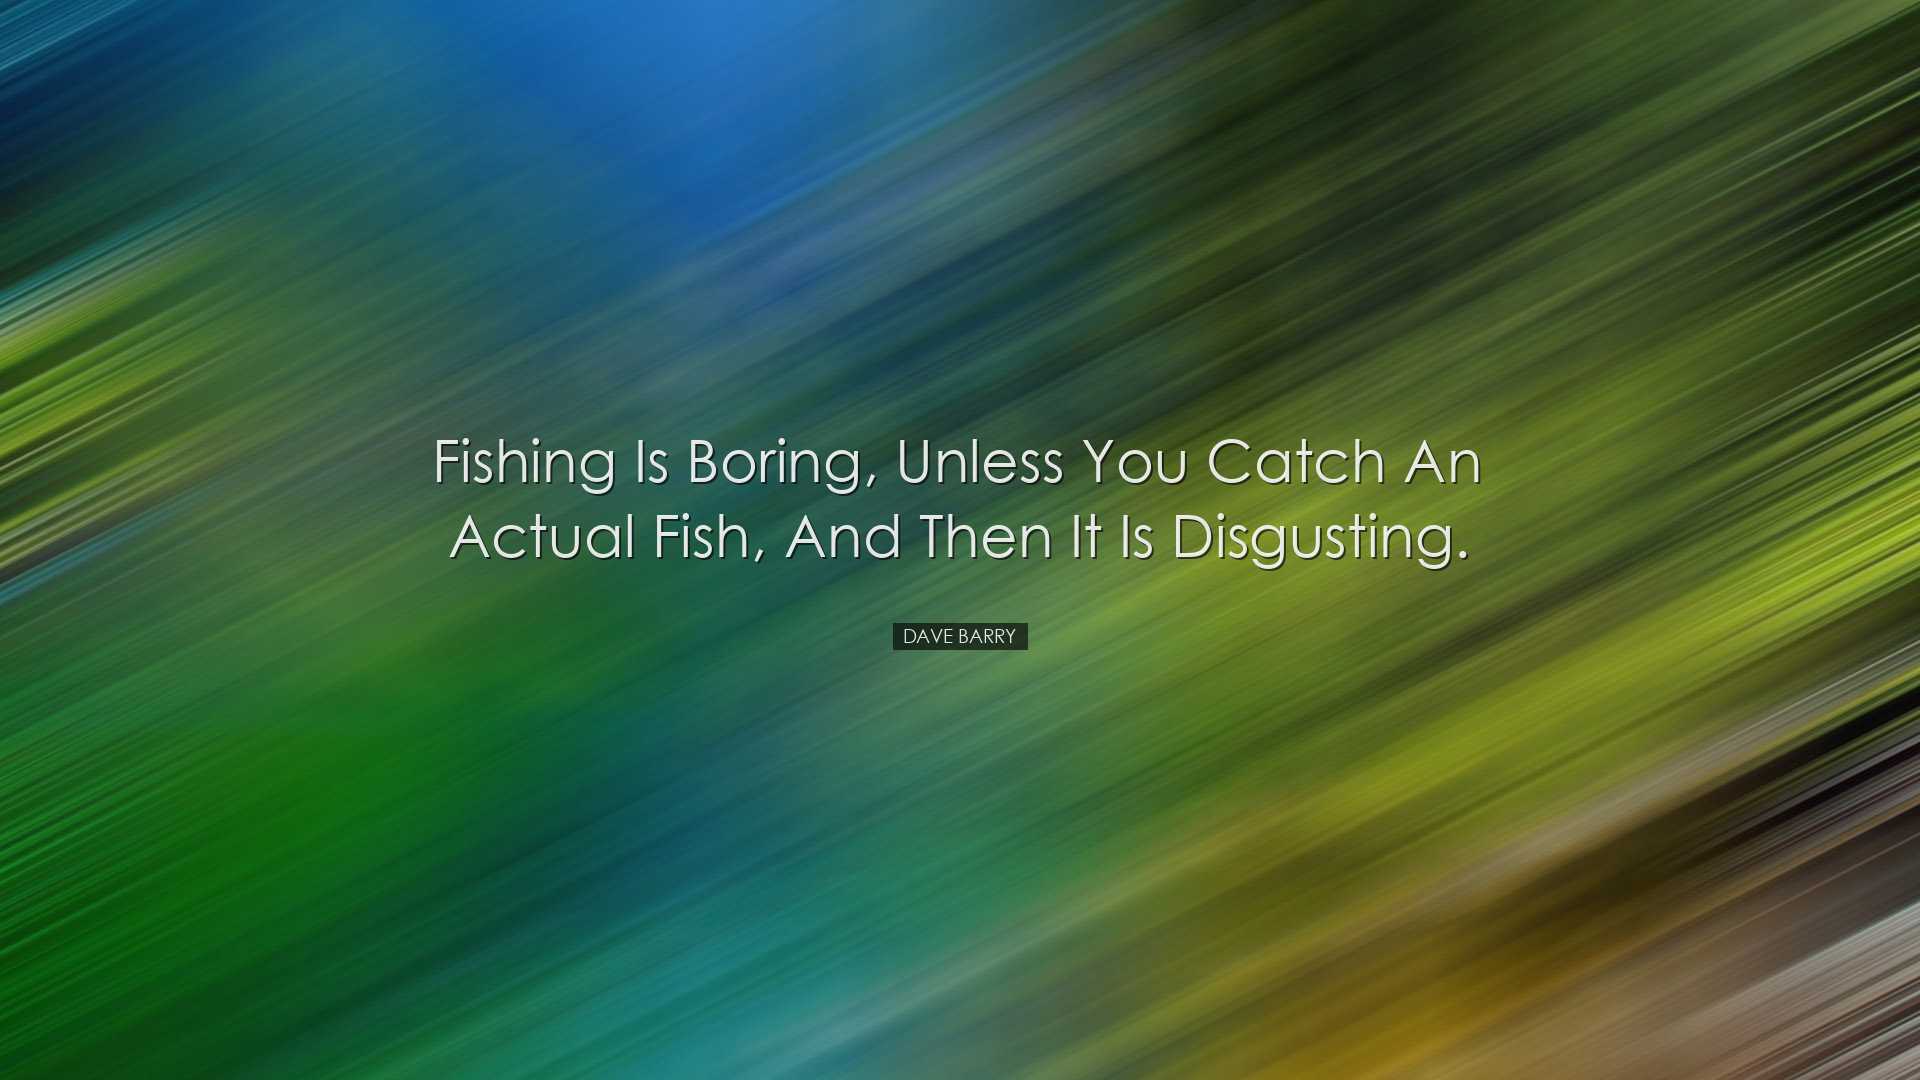 Fishing is boring, unless you catch an actual fish, and then it is